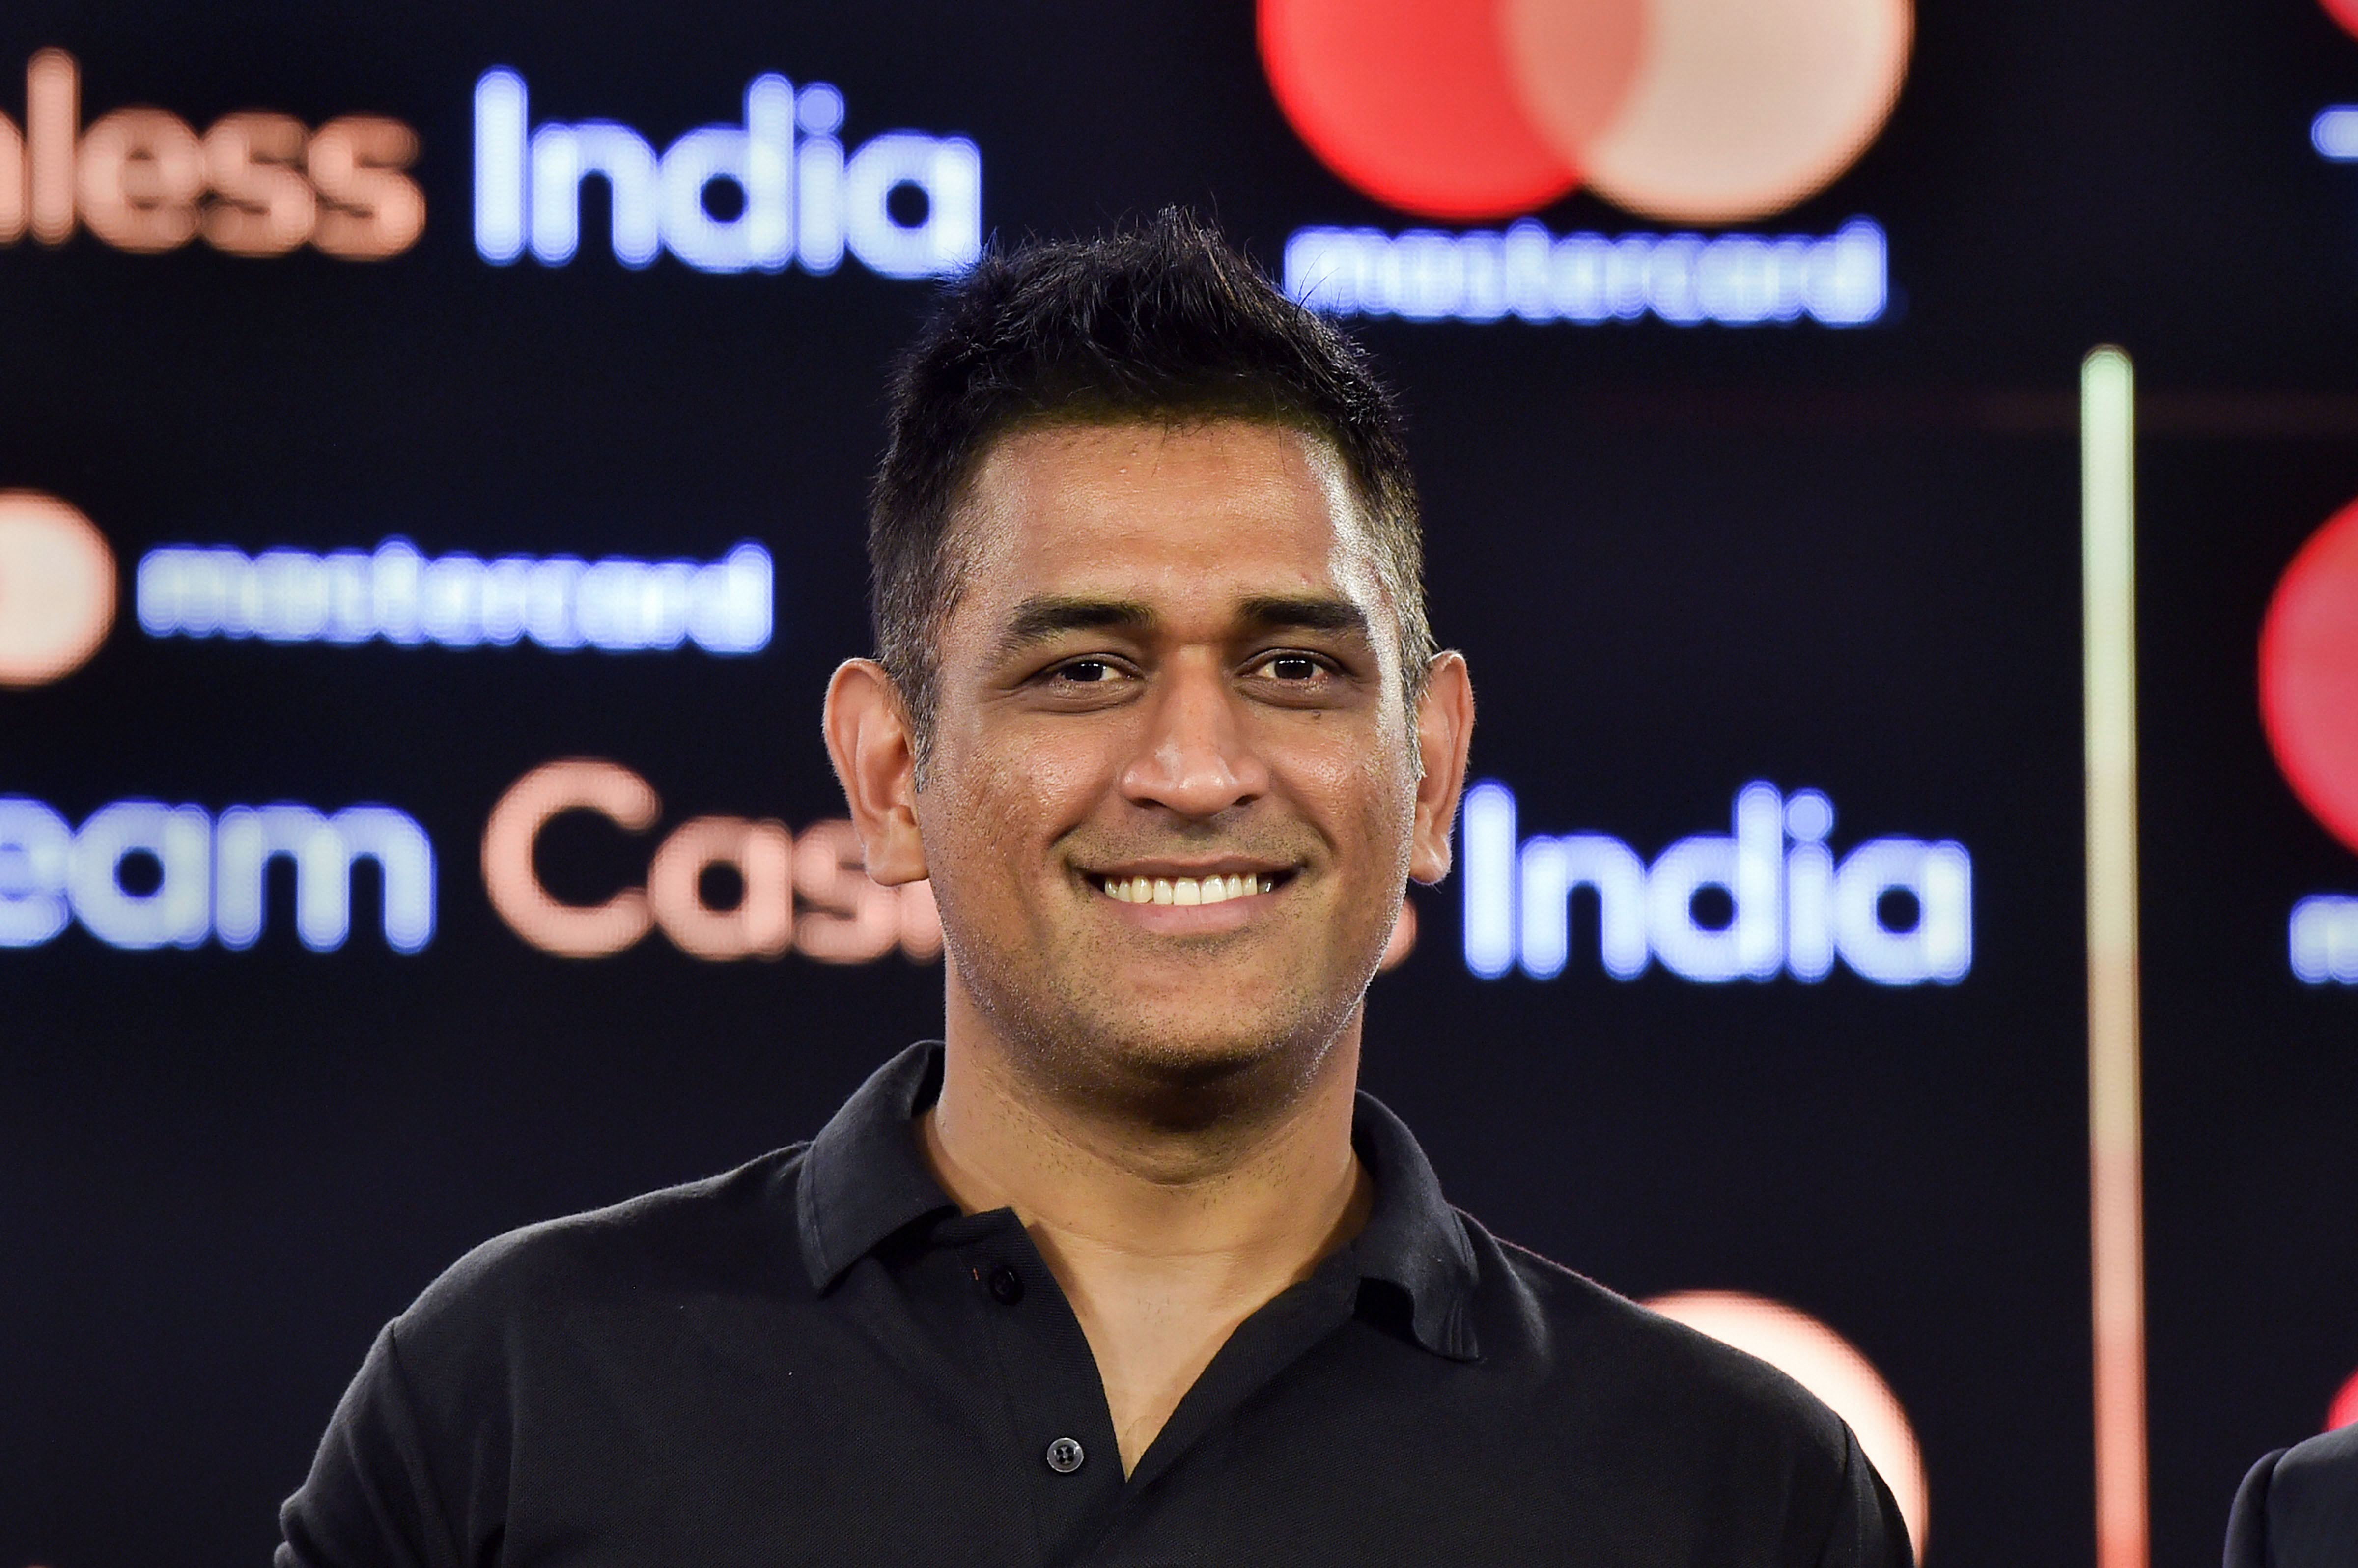 Indian cricketer Mahendra Singh Dhoni during the launch of 'Mastercard Team Cashless India', a nationwide initiative to accelerate and adoption of digital payment - PTI